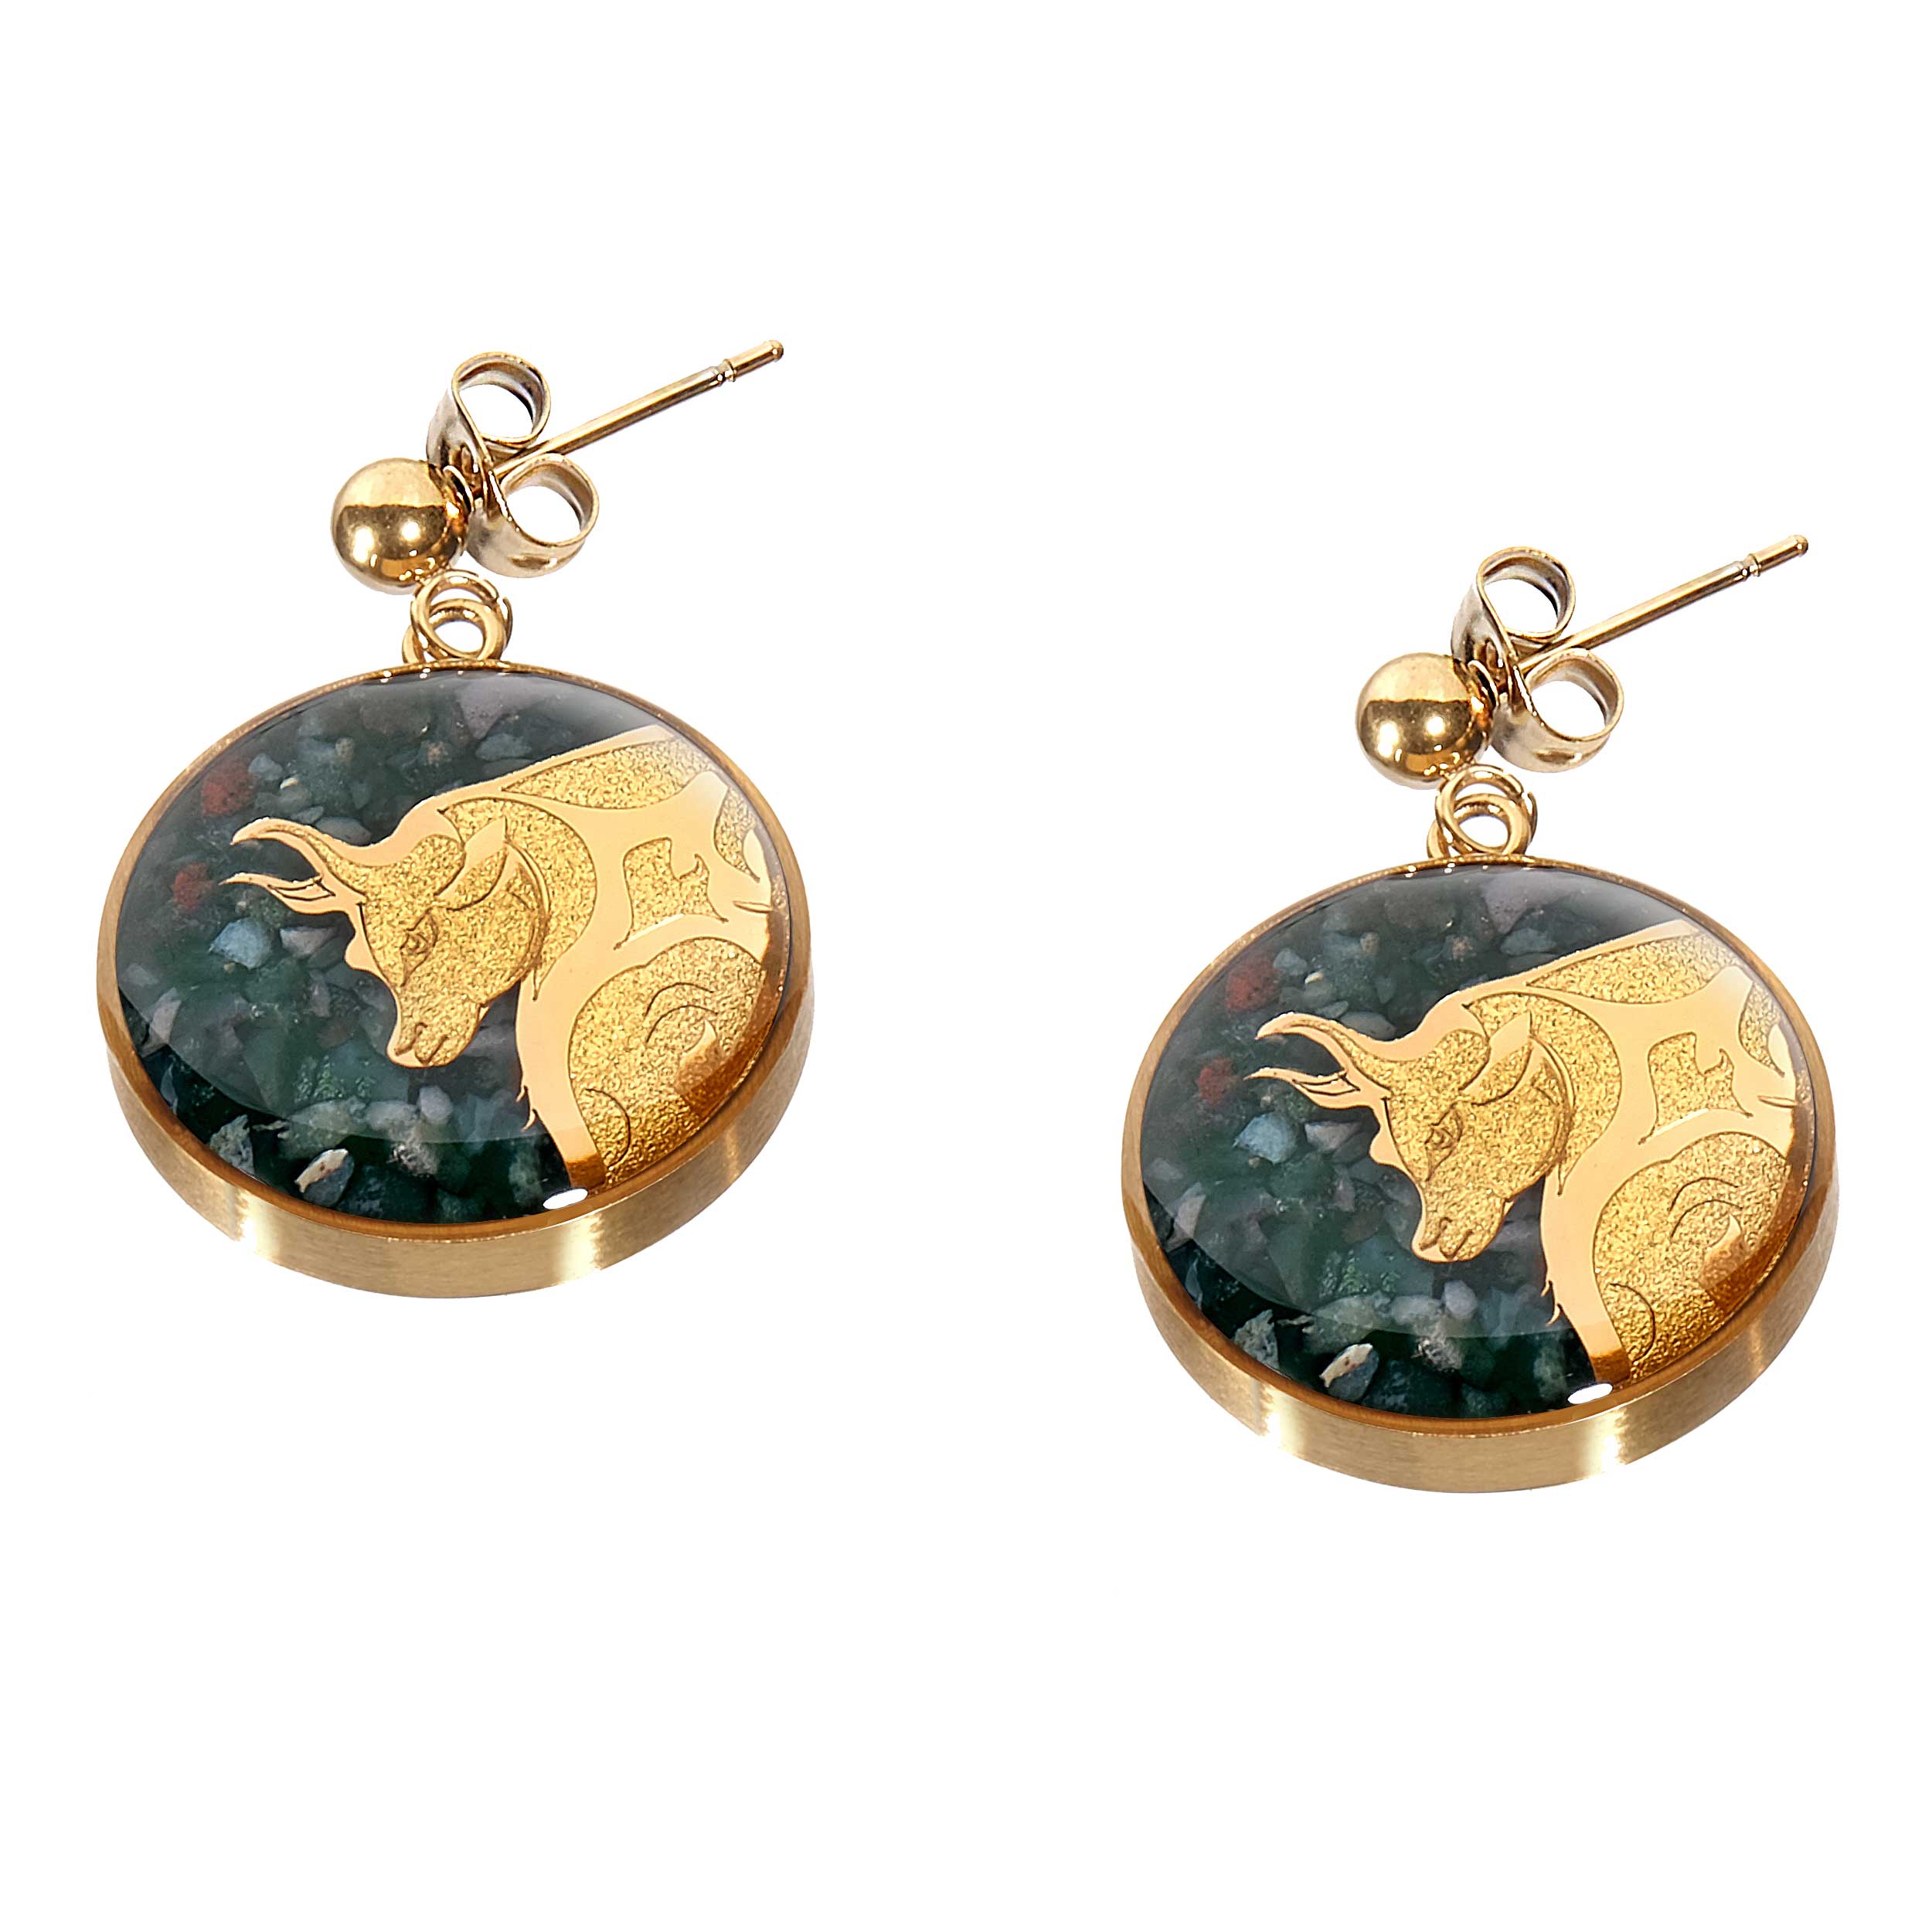 24 carat gold leaf earrings with the symbol design of May